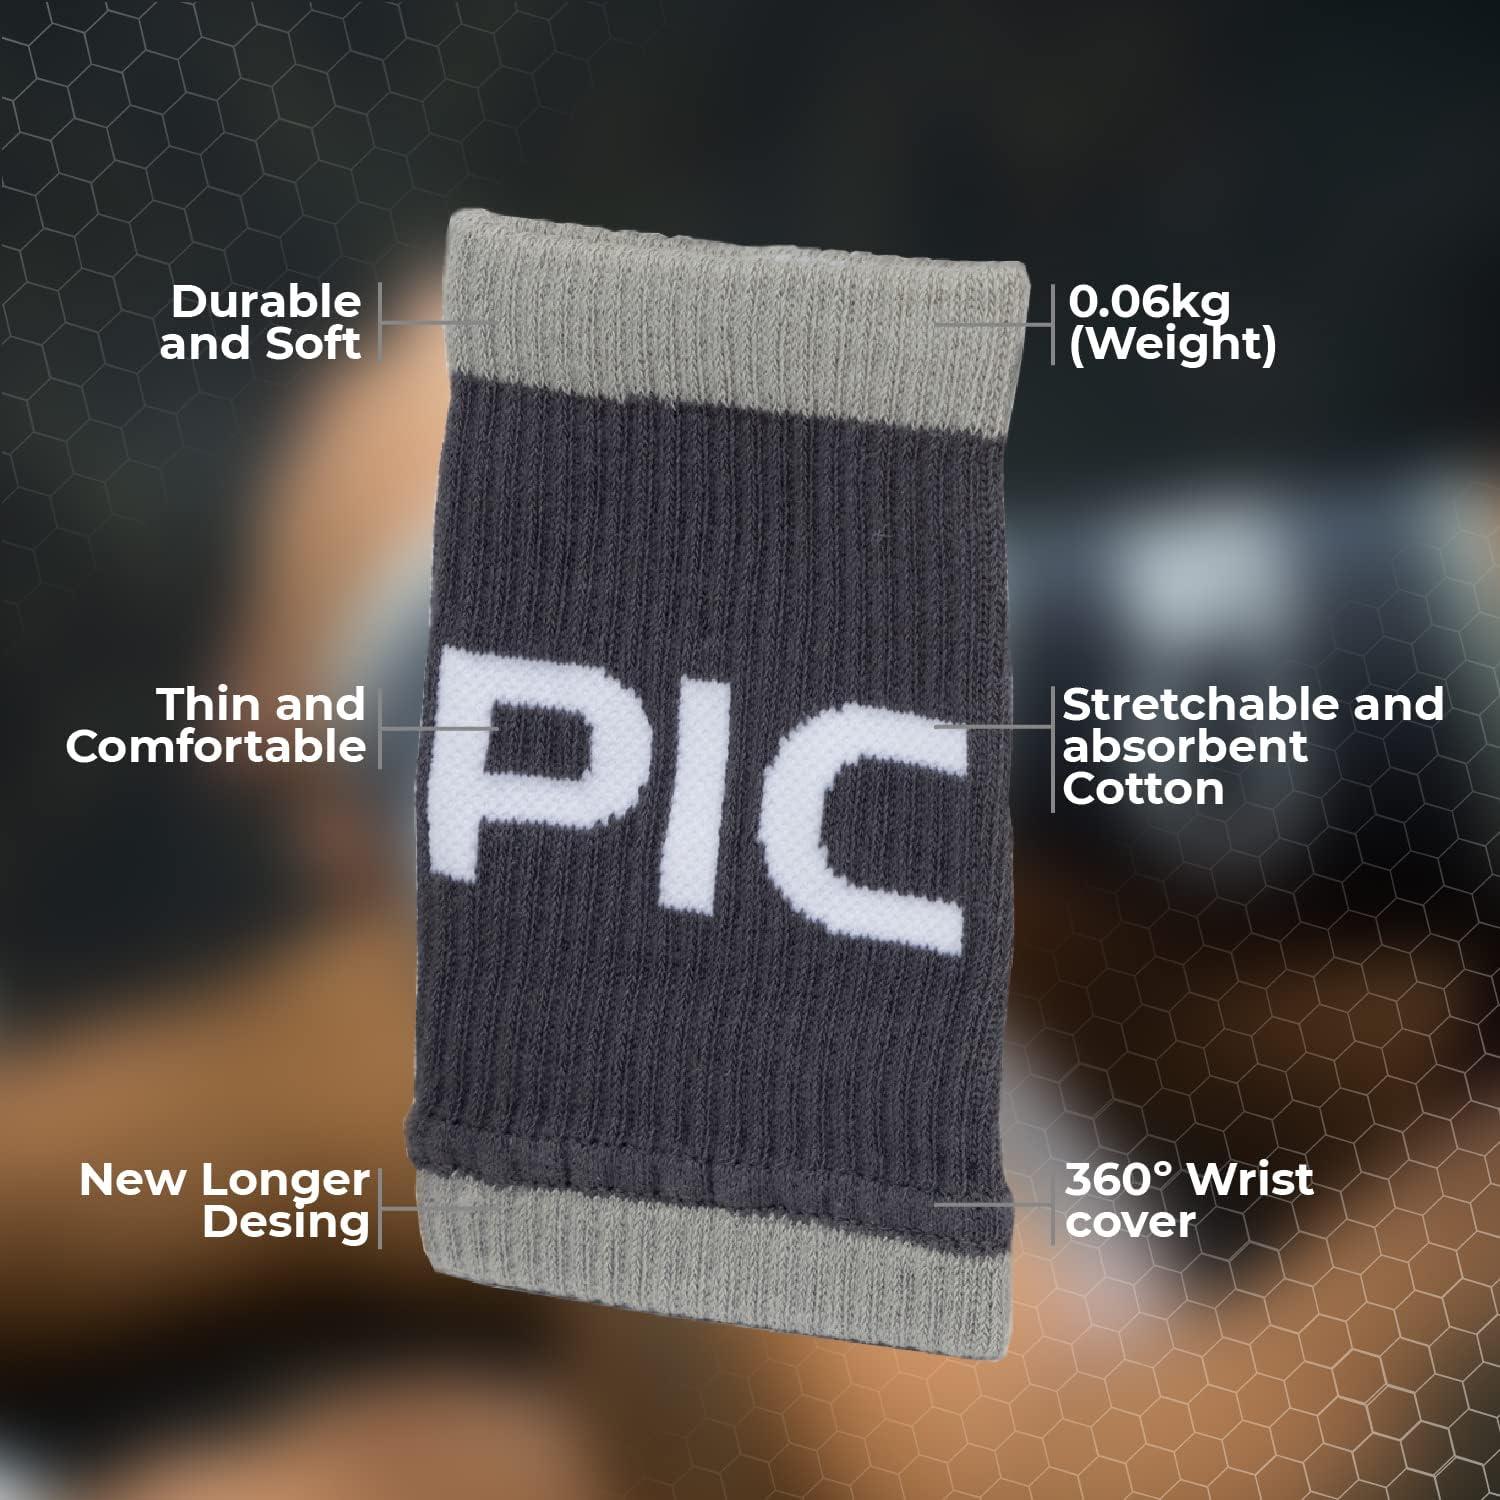  PICSIL Fabric Wristbands for Cross Training, Great